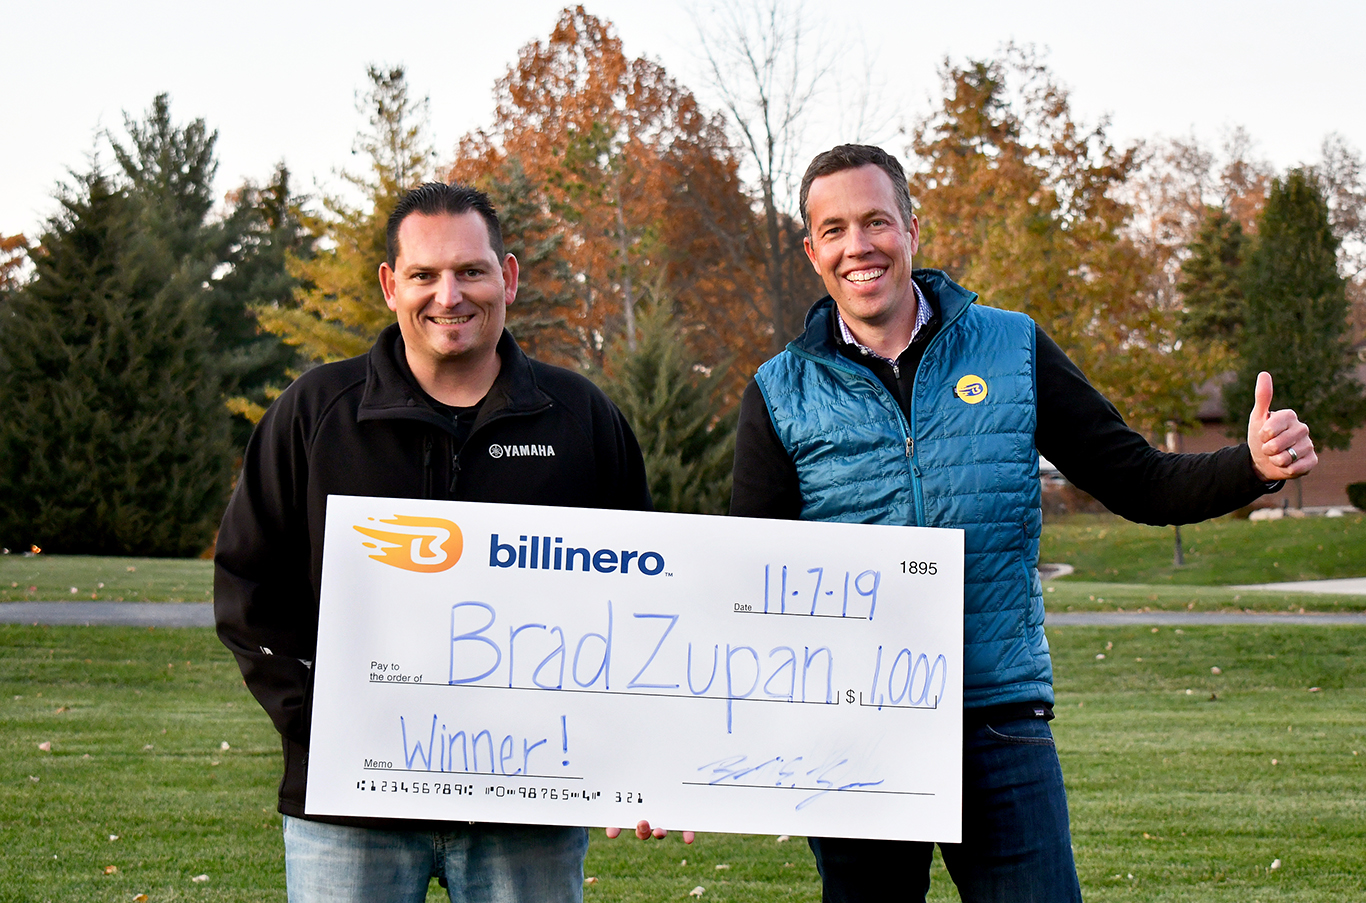 Billinero's October 2019 winner, Brad Zupan, with Billinero Executive Vice President, Chris Campbell outside Zupan's home in Indiana. Billinero™ is a mobile application that was launched in August 2019 by Centier Bank. The digital-only, prize-linked savings account has a game-like approach, offering customers the opportunity to win cash prizes of $1,000 monthly and at least $10,000 quarterly at no risk while also increasing their financial savings. The application is currently available to users who reside in Arkansas, Connecticut, Illinois, Indiana, Kansas, Michigan, Minnesota, Missouri, Nebraska, Oregon, South Carolina, or Virginia. For more information on Billinero™, go to http://www.billinero.com.